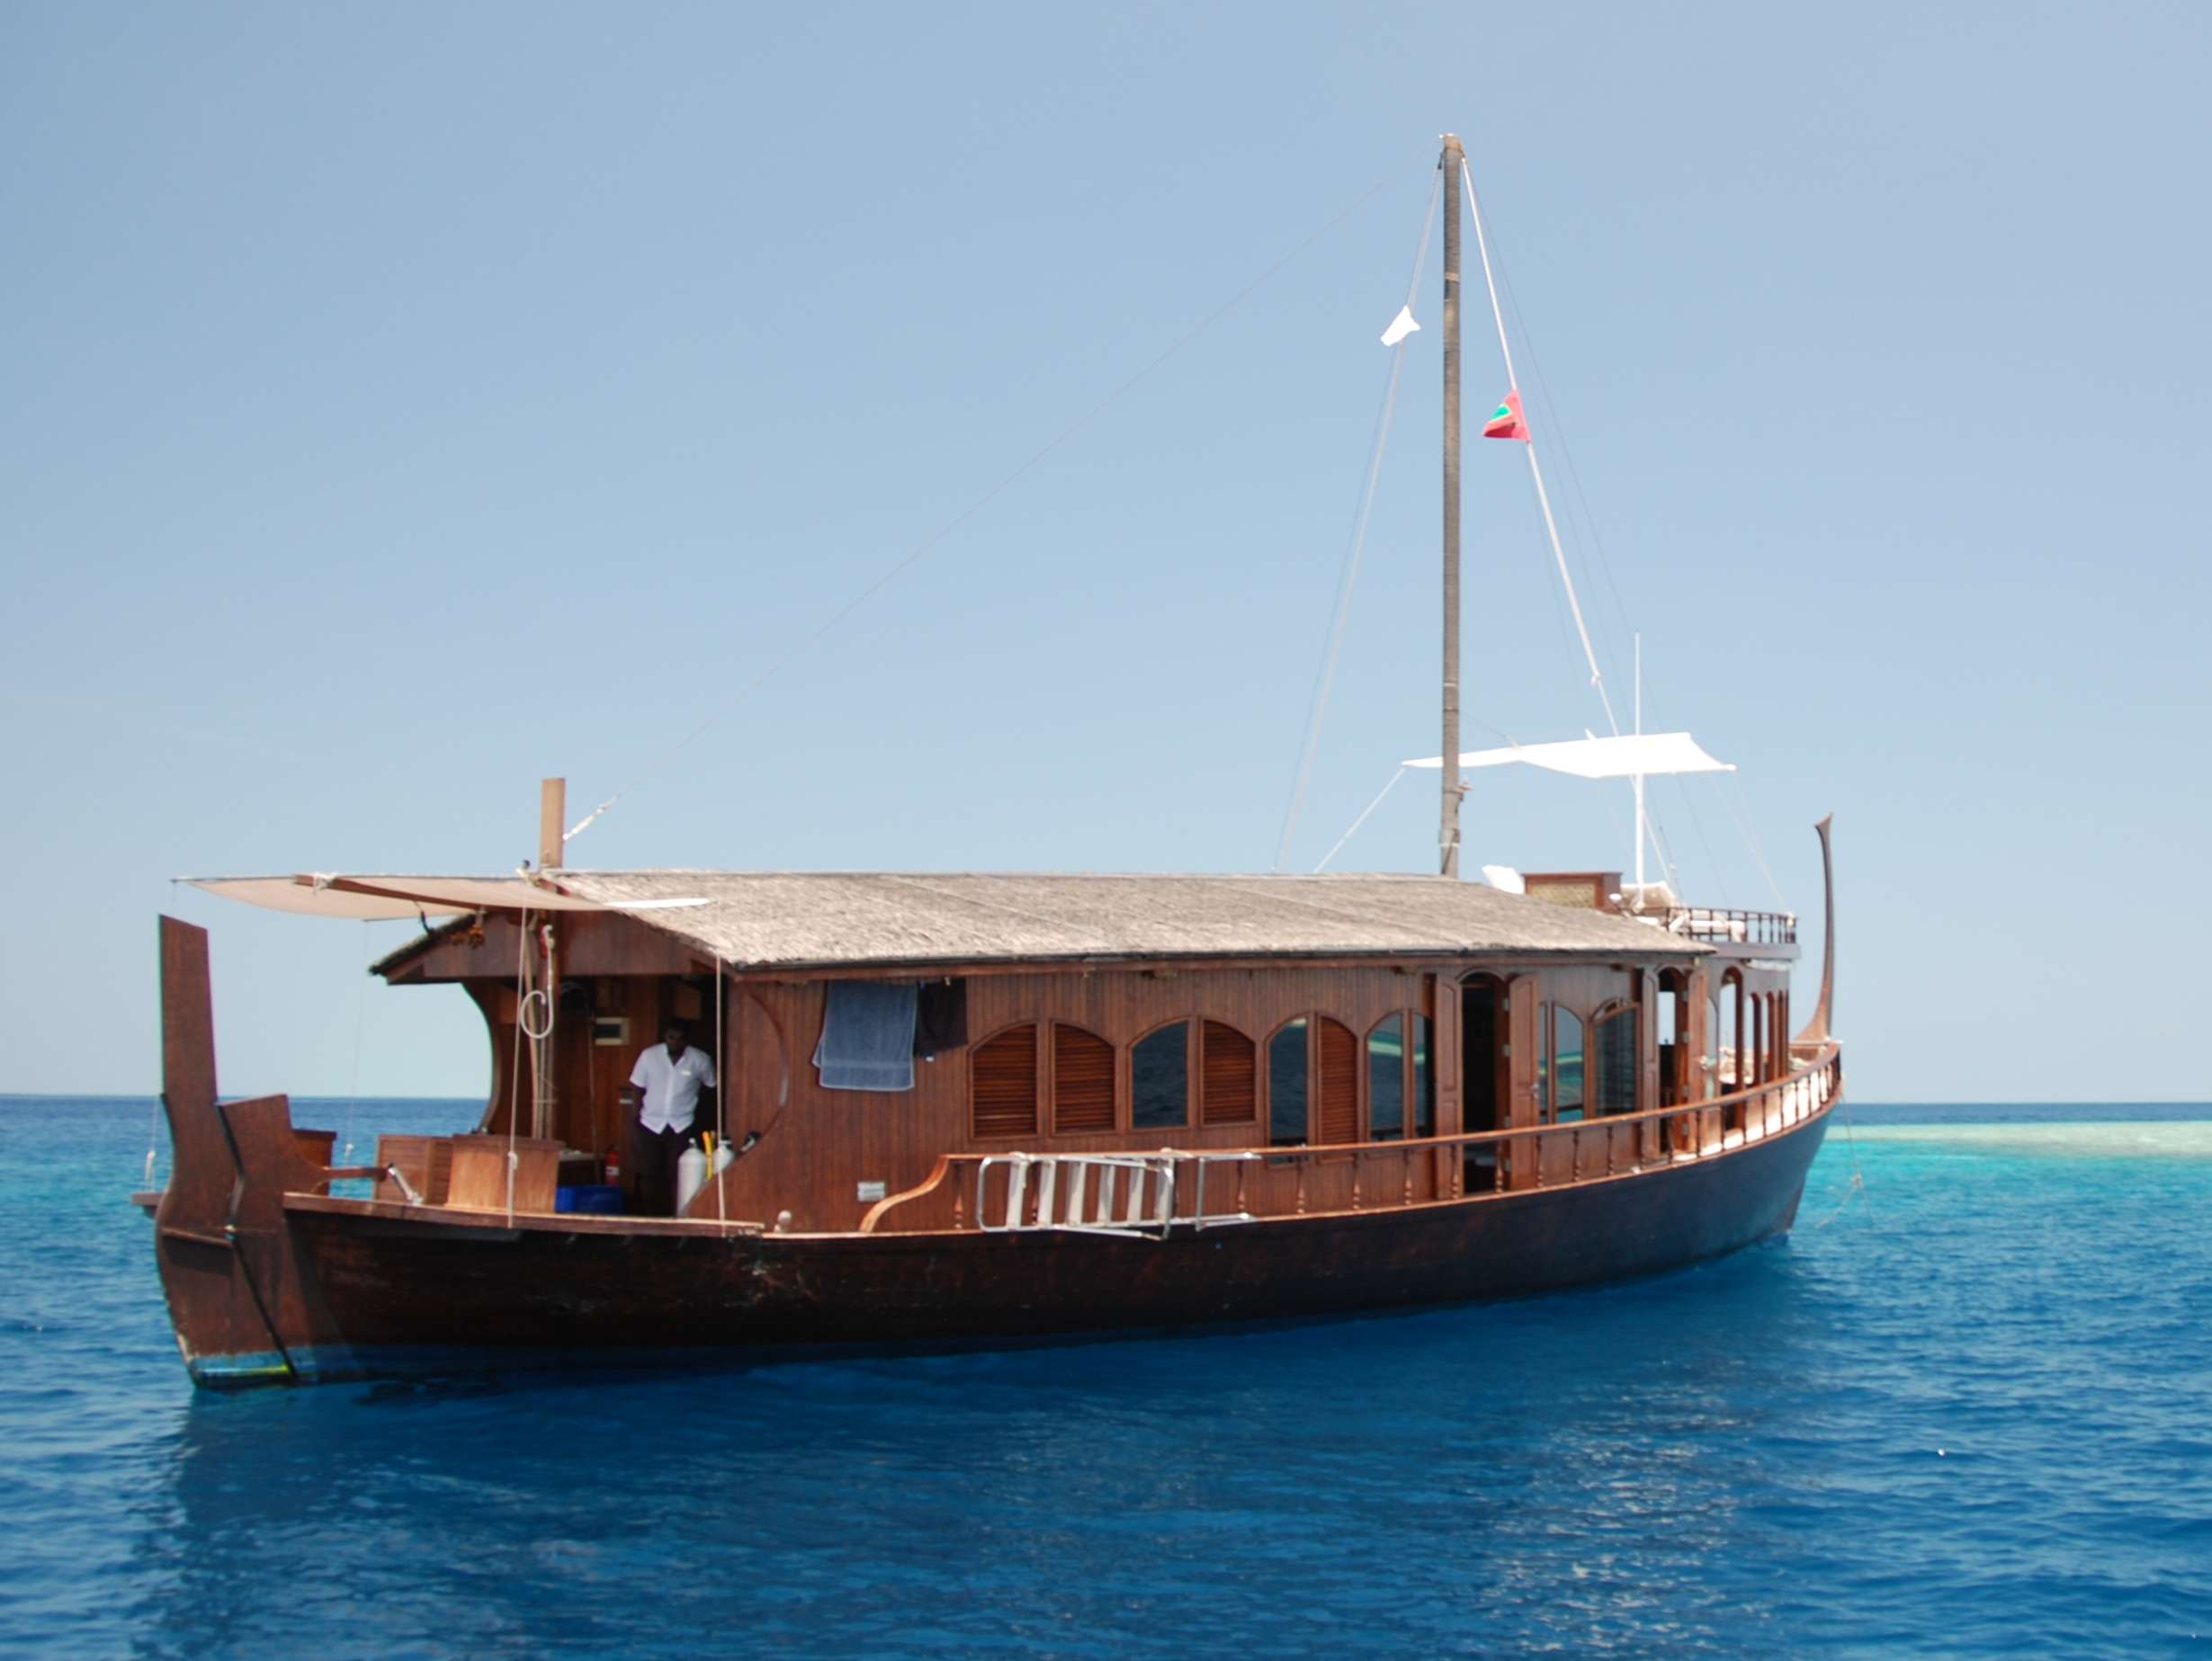 DHONI STELLA 2 - Luxury yacht charter Maldives & Boat hire in Indian Ocean & SE Asia 4